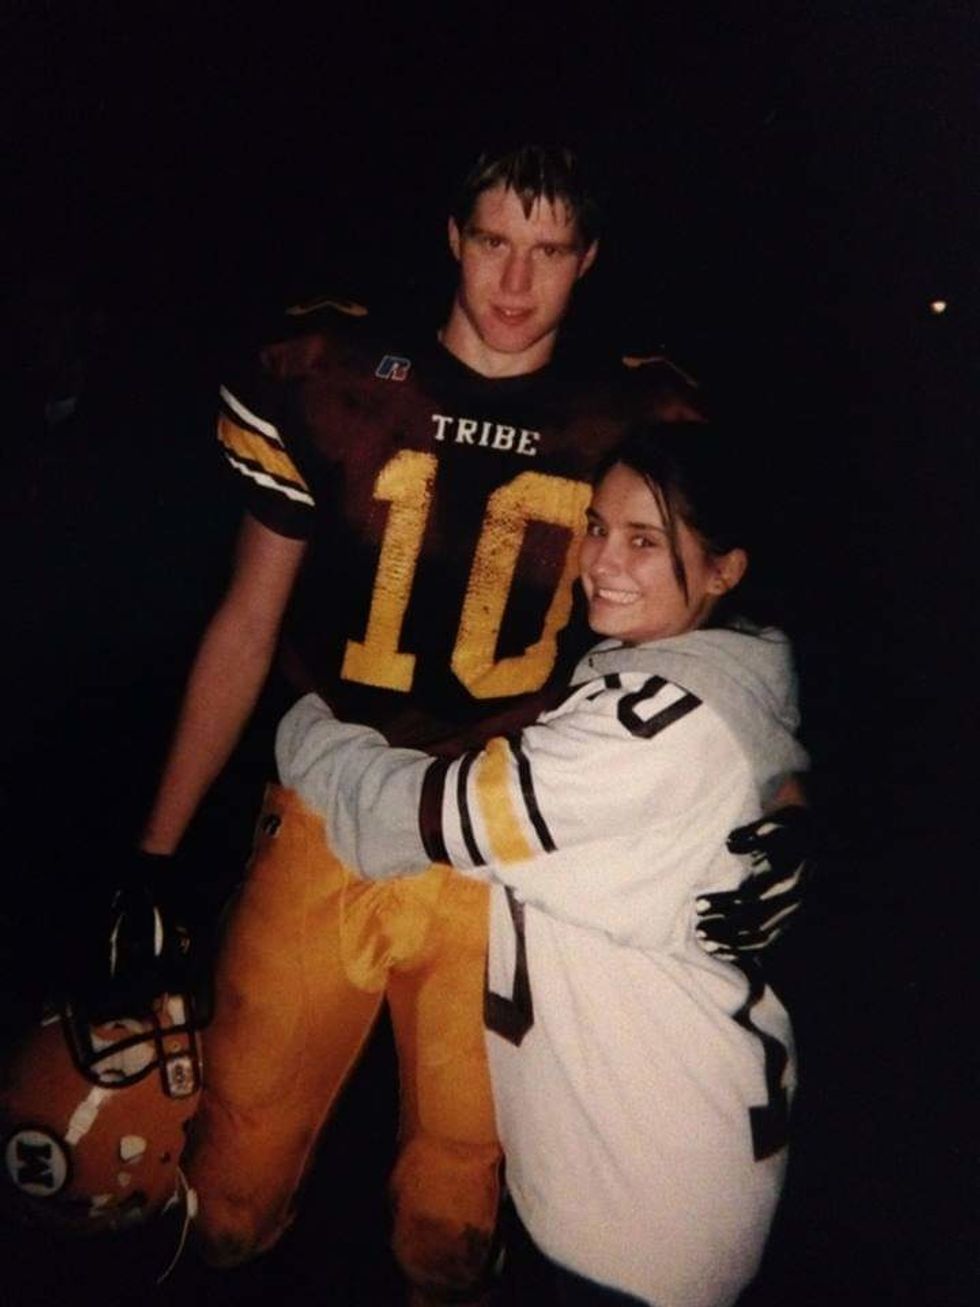 This is a photo of my husband and I just after one of his football games in High School. 